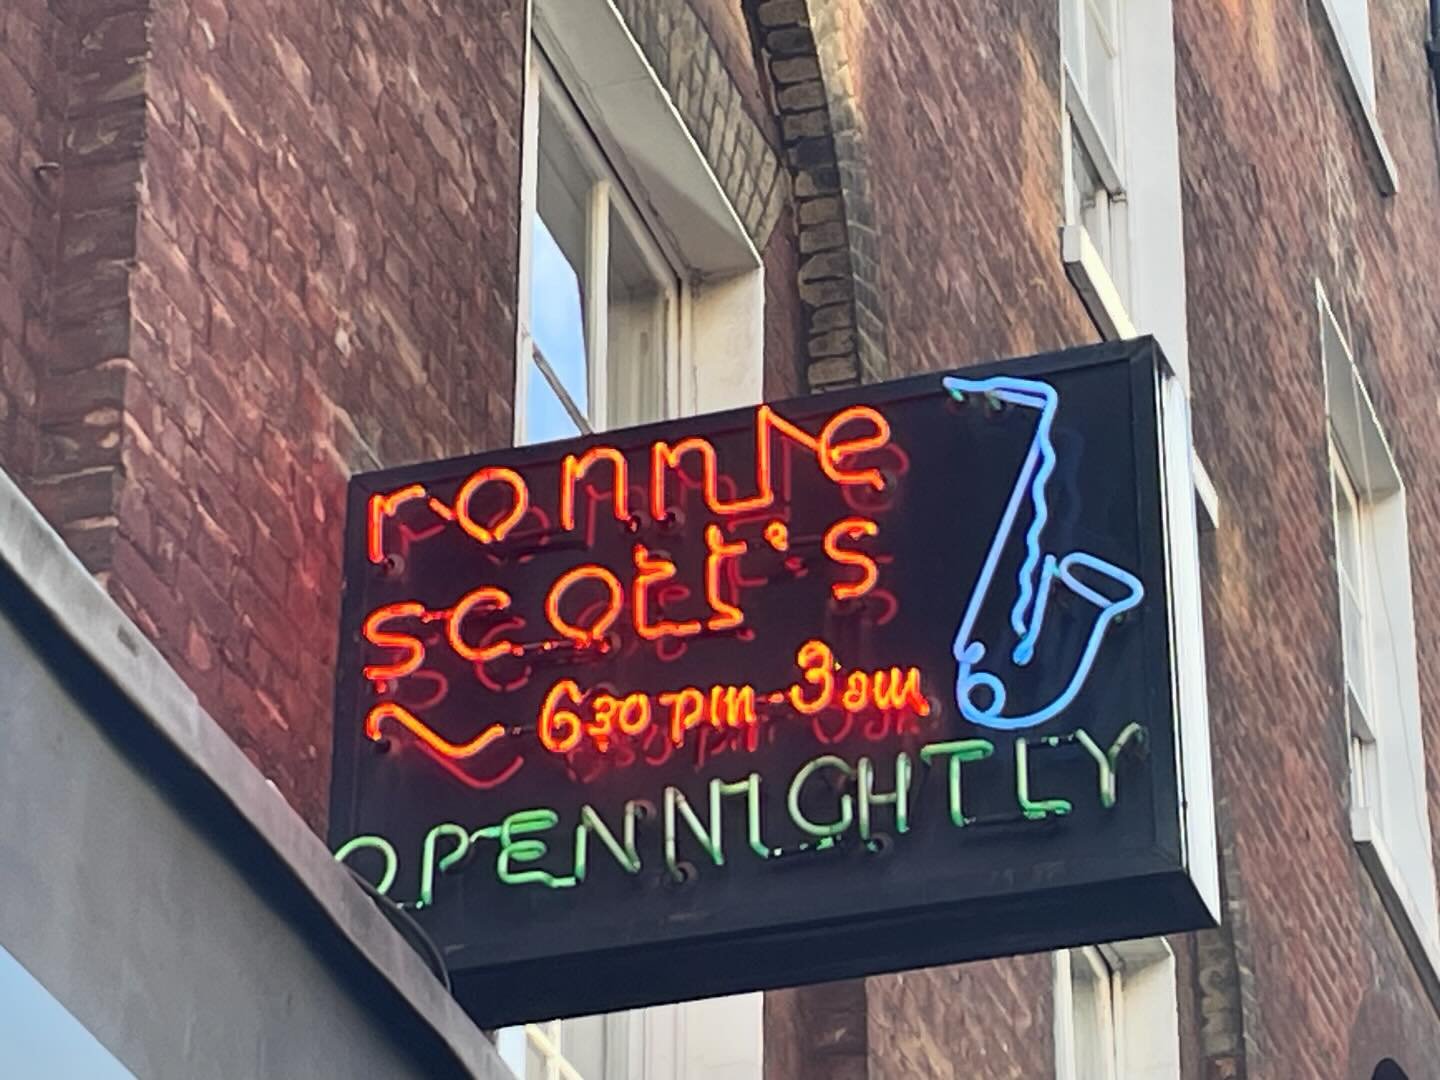 A fund raiser in the is famous London icon of music Ronnie Scott&rsquo;s in Soho. @stripstudios